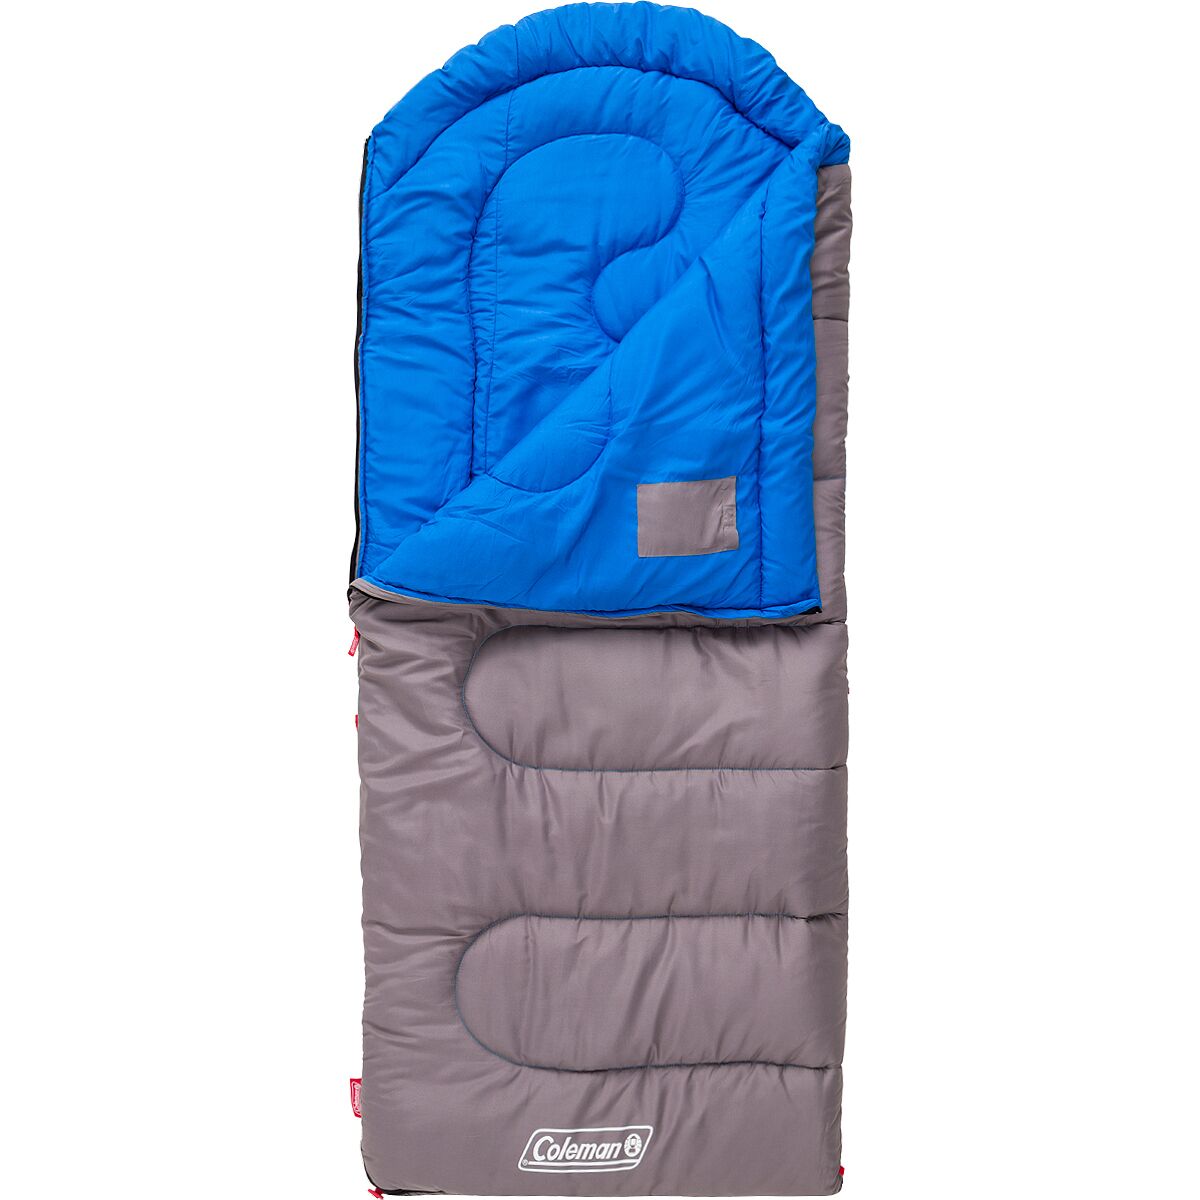 Coleman Cont Dexter Sleeping Bag: 30 Degree Synthetic